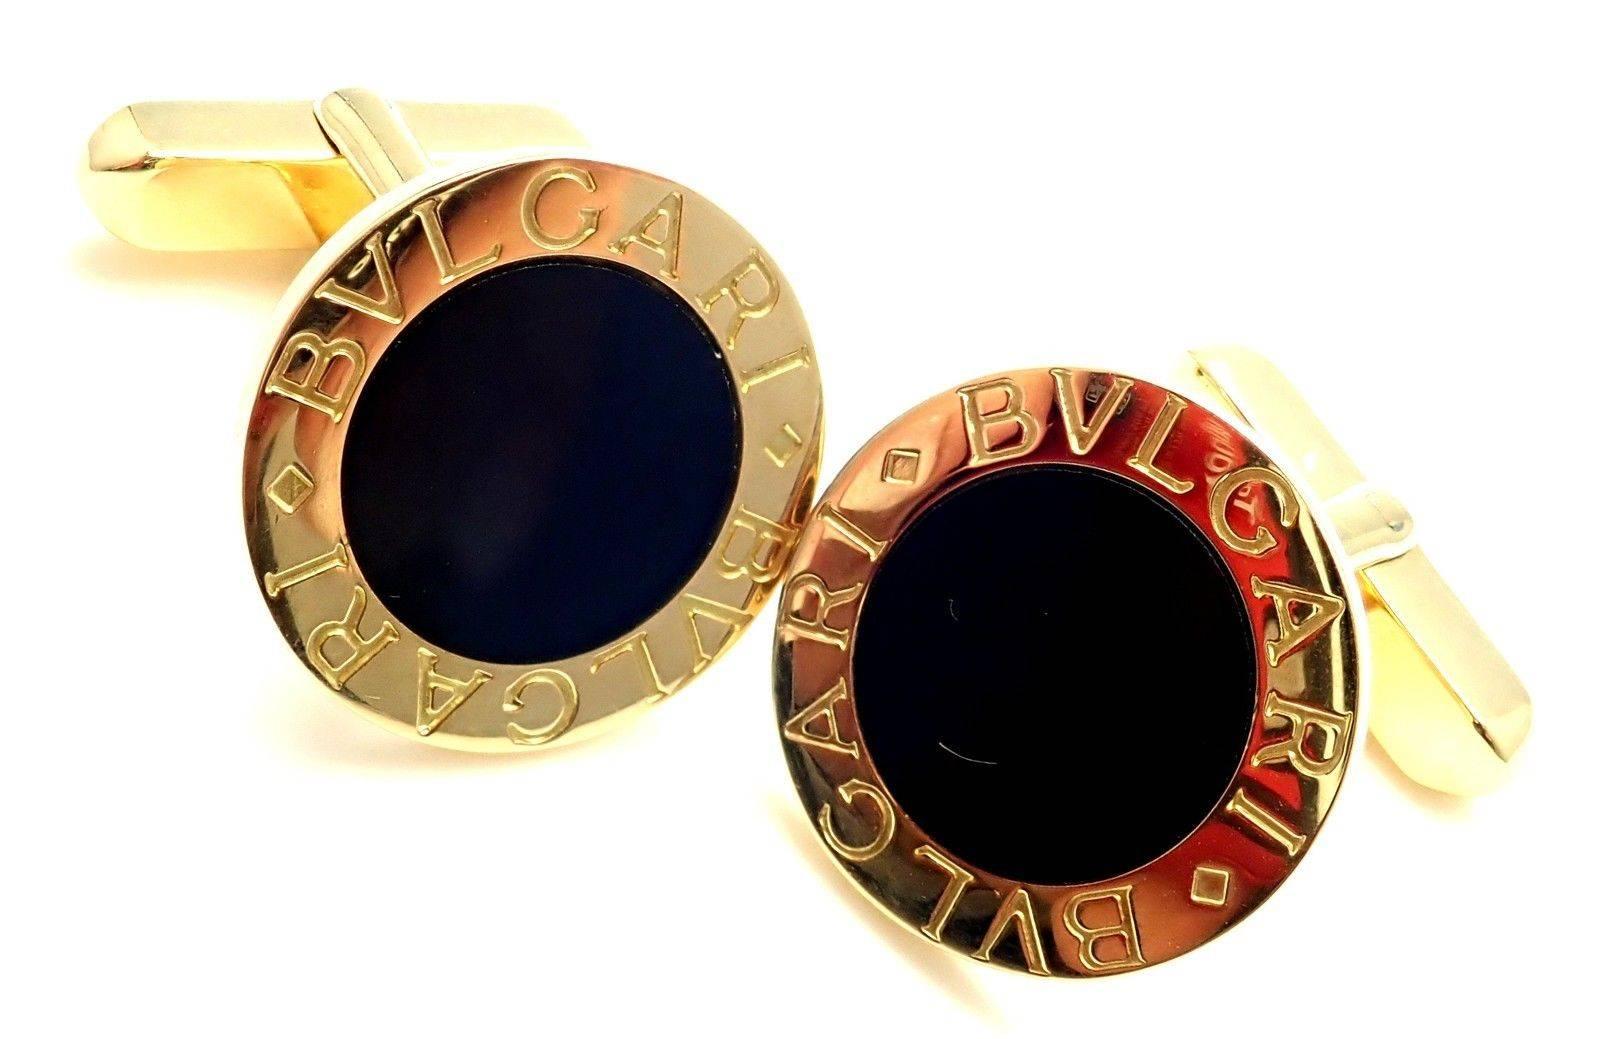 18k Yellow Gold Black Onyx Cufflinks by Bulgari. 
With 2 Black Onyx stones.
Details: 
Measurements: 17mm x 18mm x 20mm
Weight: 14.3 grams
Stamped Hallmarks: Bulgari, 750, 2337AL
*Free Shipping within the United States*
YOUR PRICE: $2,800
T1824mmld